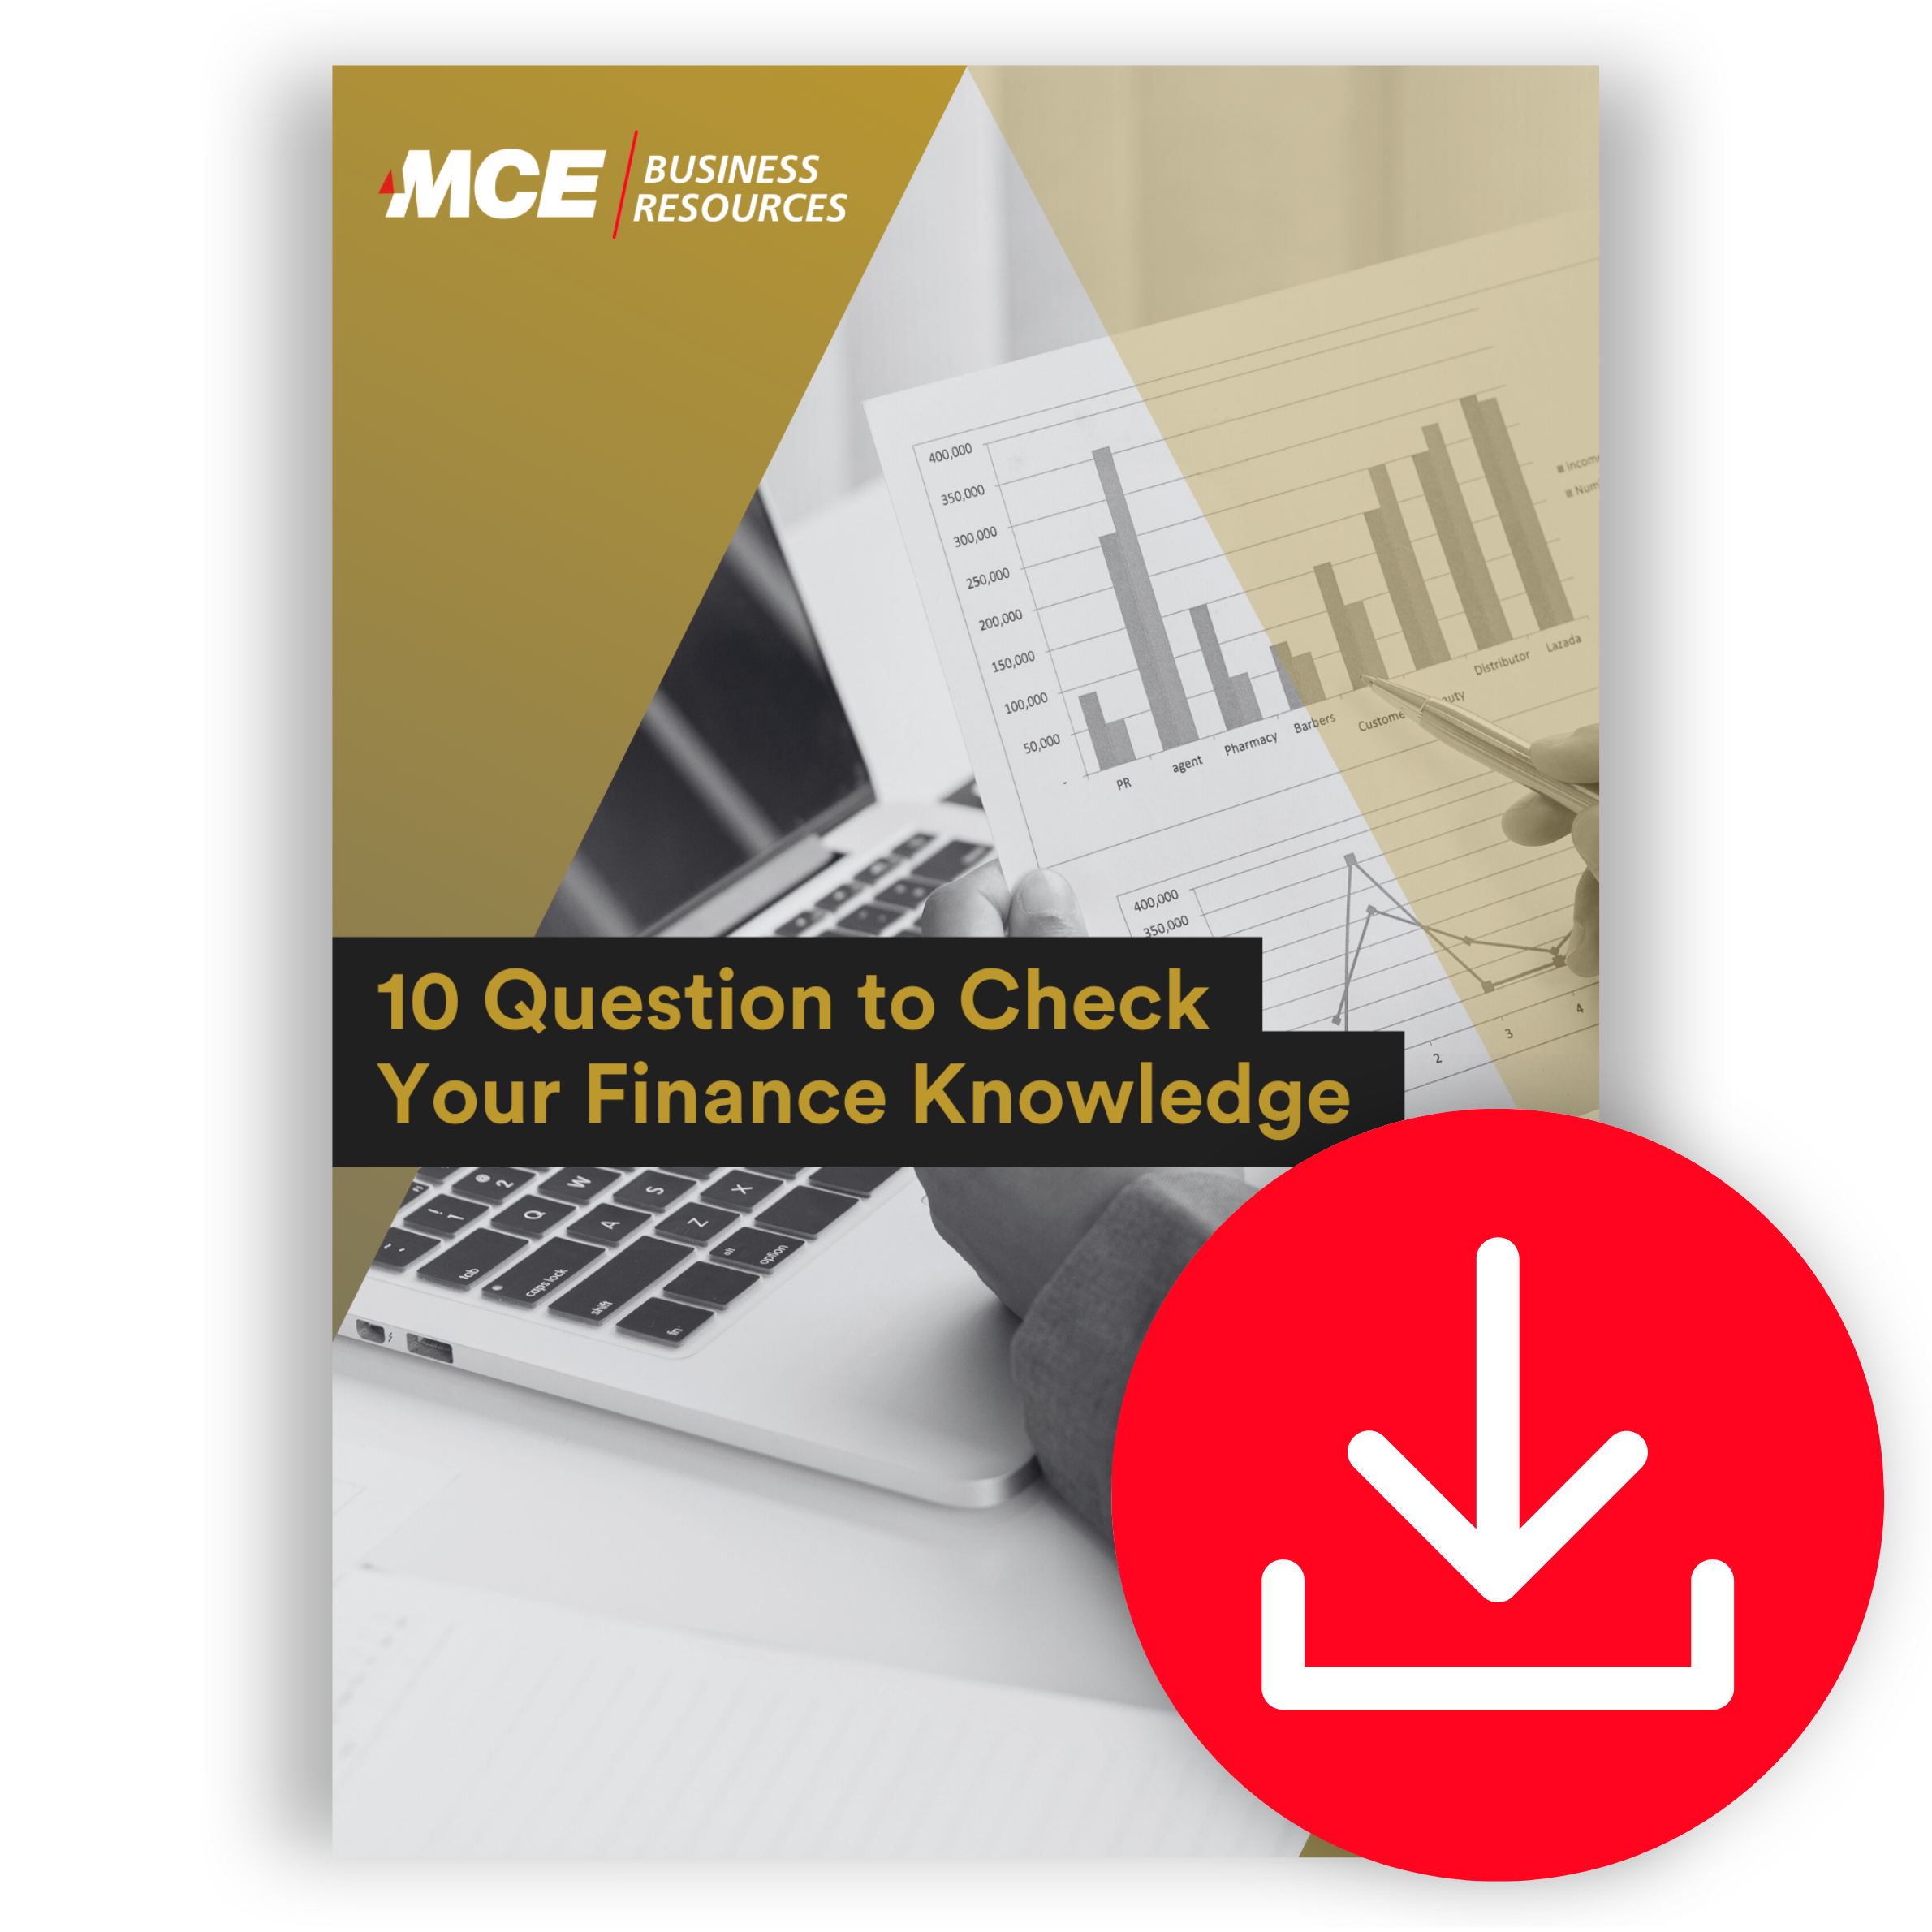 Take the Quiz! 10 Question to Check Your Finance Knowledge